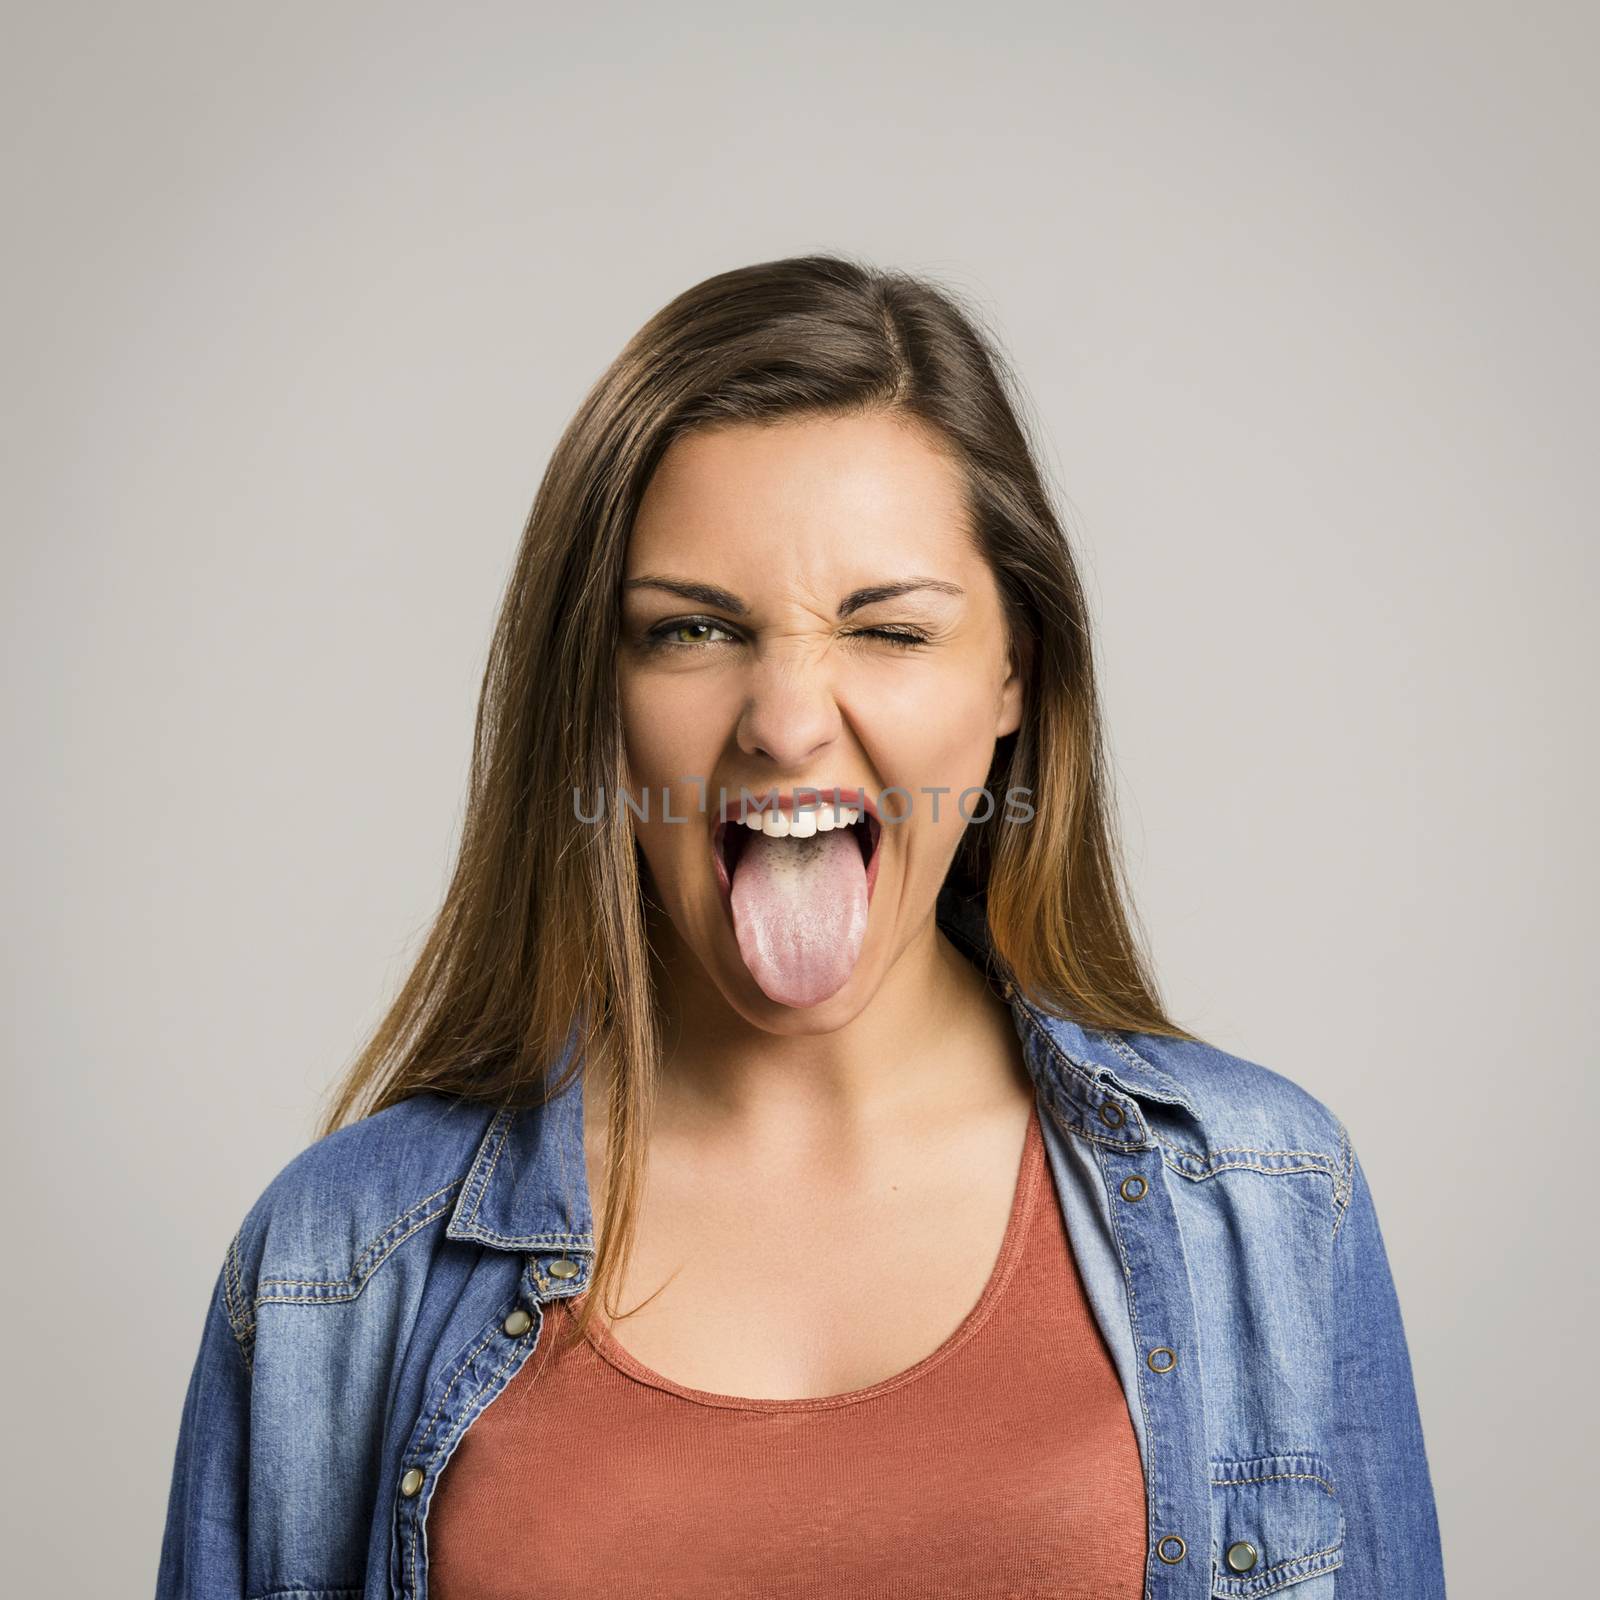 Woman with tongue out by Iko